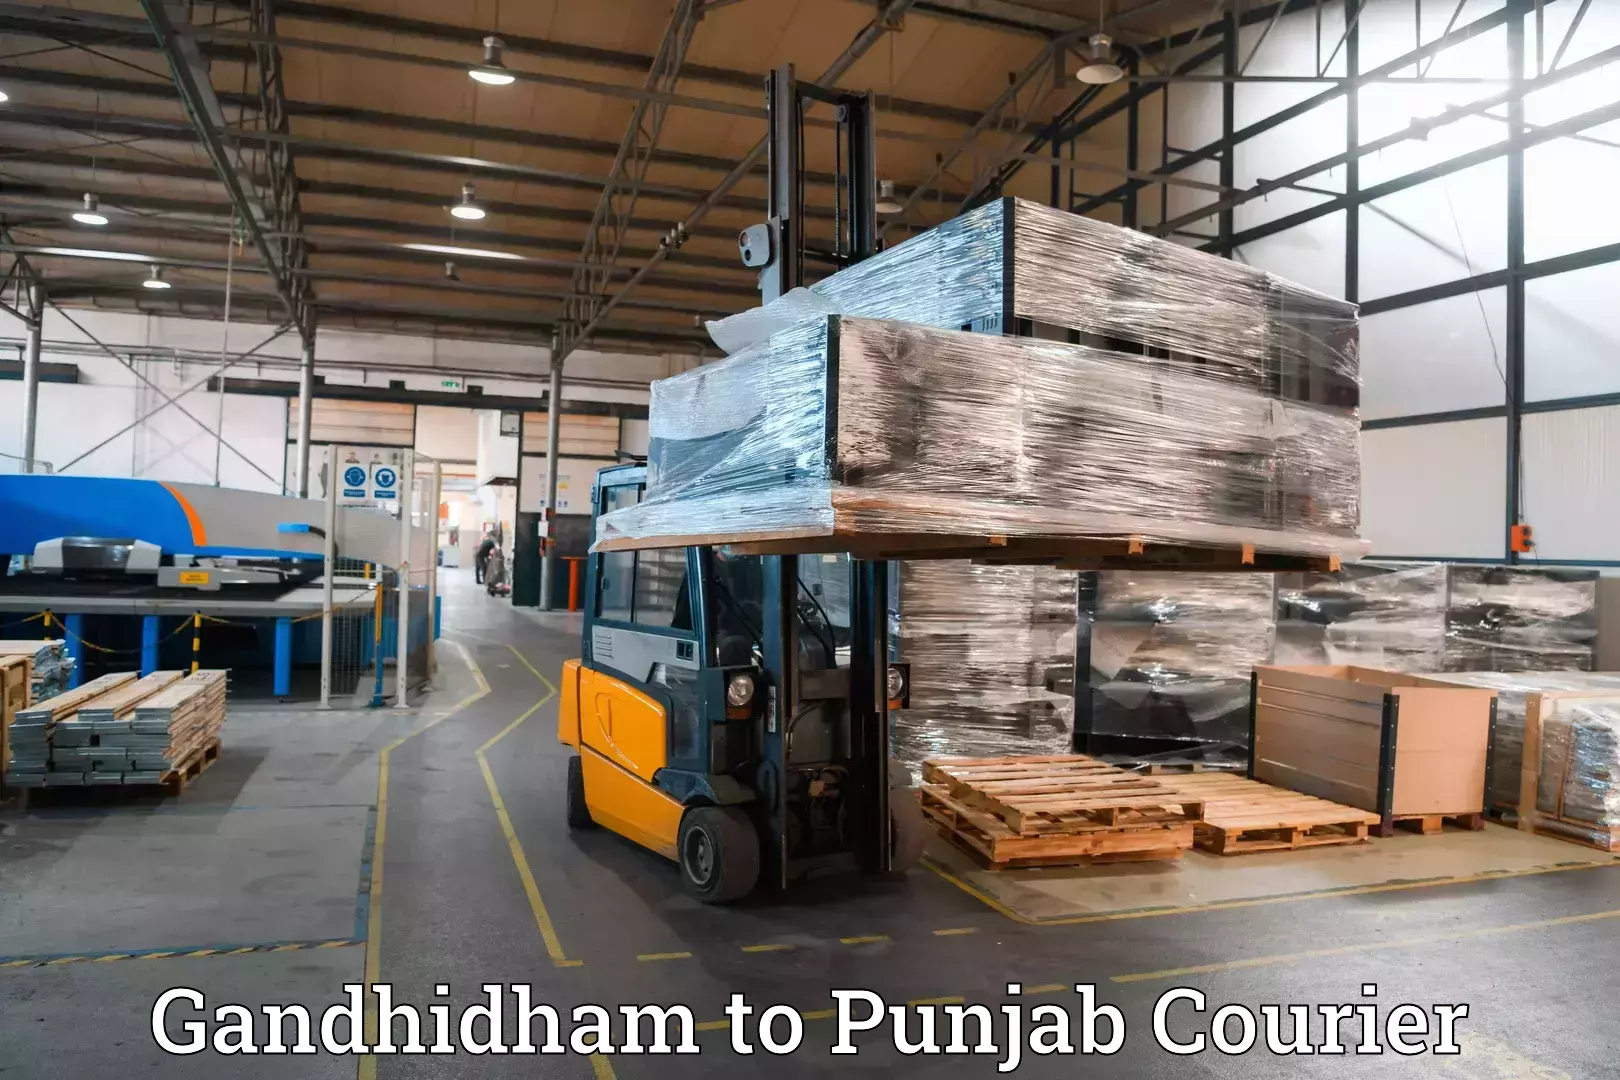 Luggage delivery providers Gandhidham to Punjab